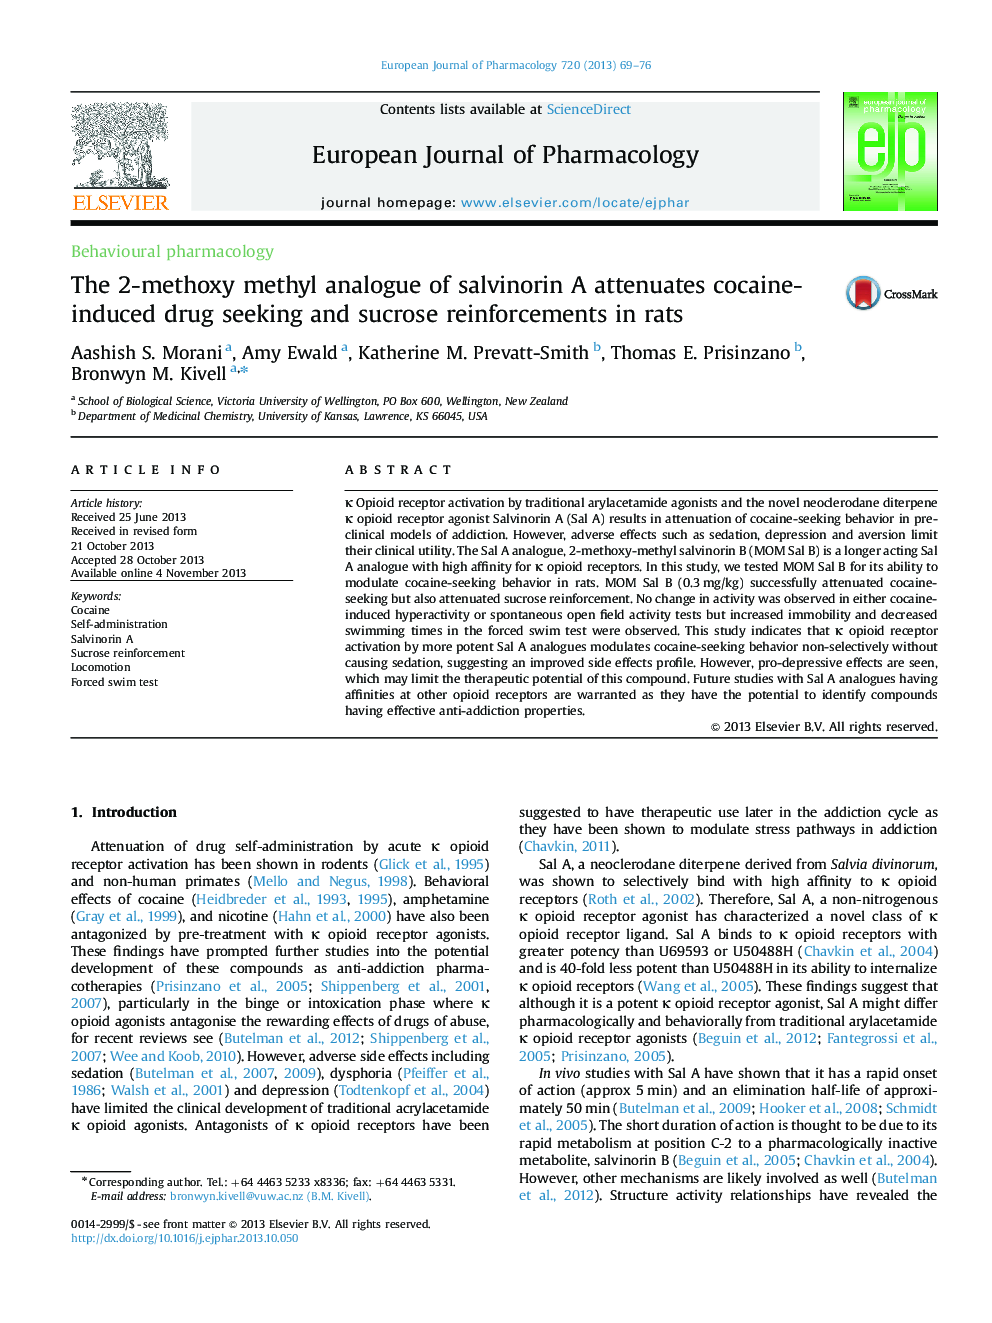 The 2-methoxy methyl analogue of salvinorin A attenuates cocaine-induced drug seeking and sucrose reinforcements in rats